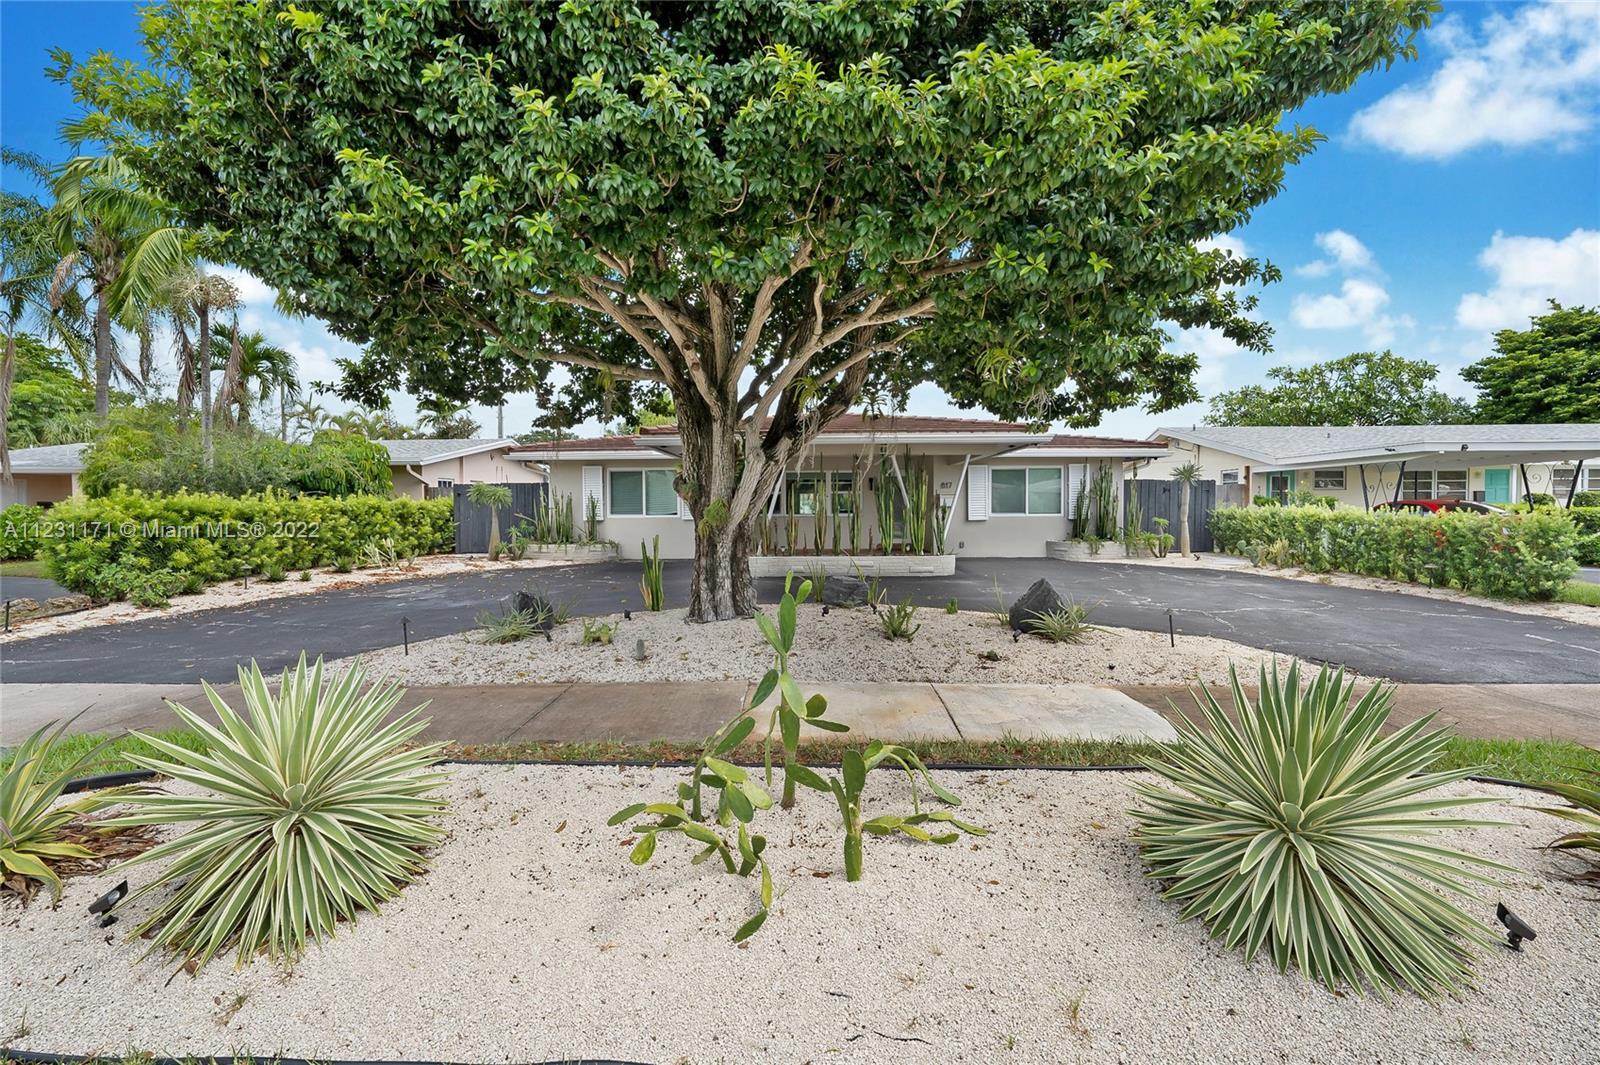 Stunning modern renovation in West Wilton Manors. This waterfront 4BD/3BA is perfectly designed for 